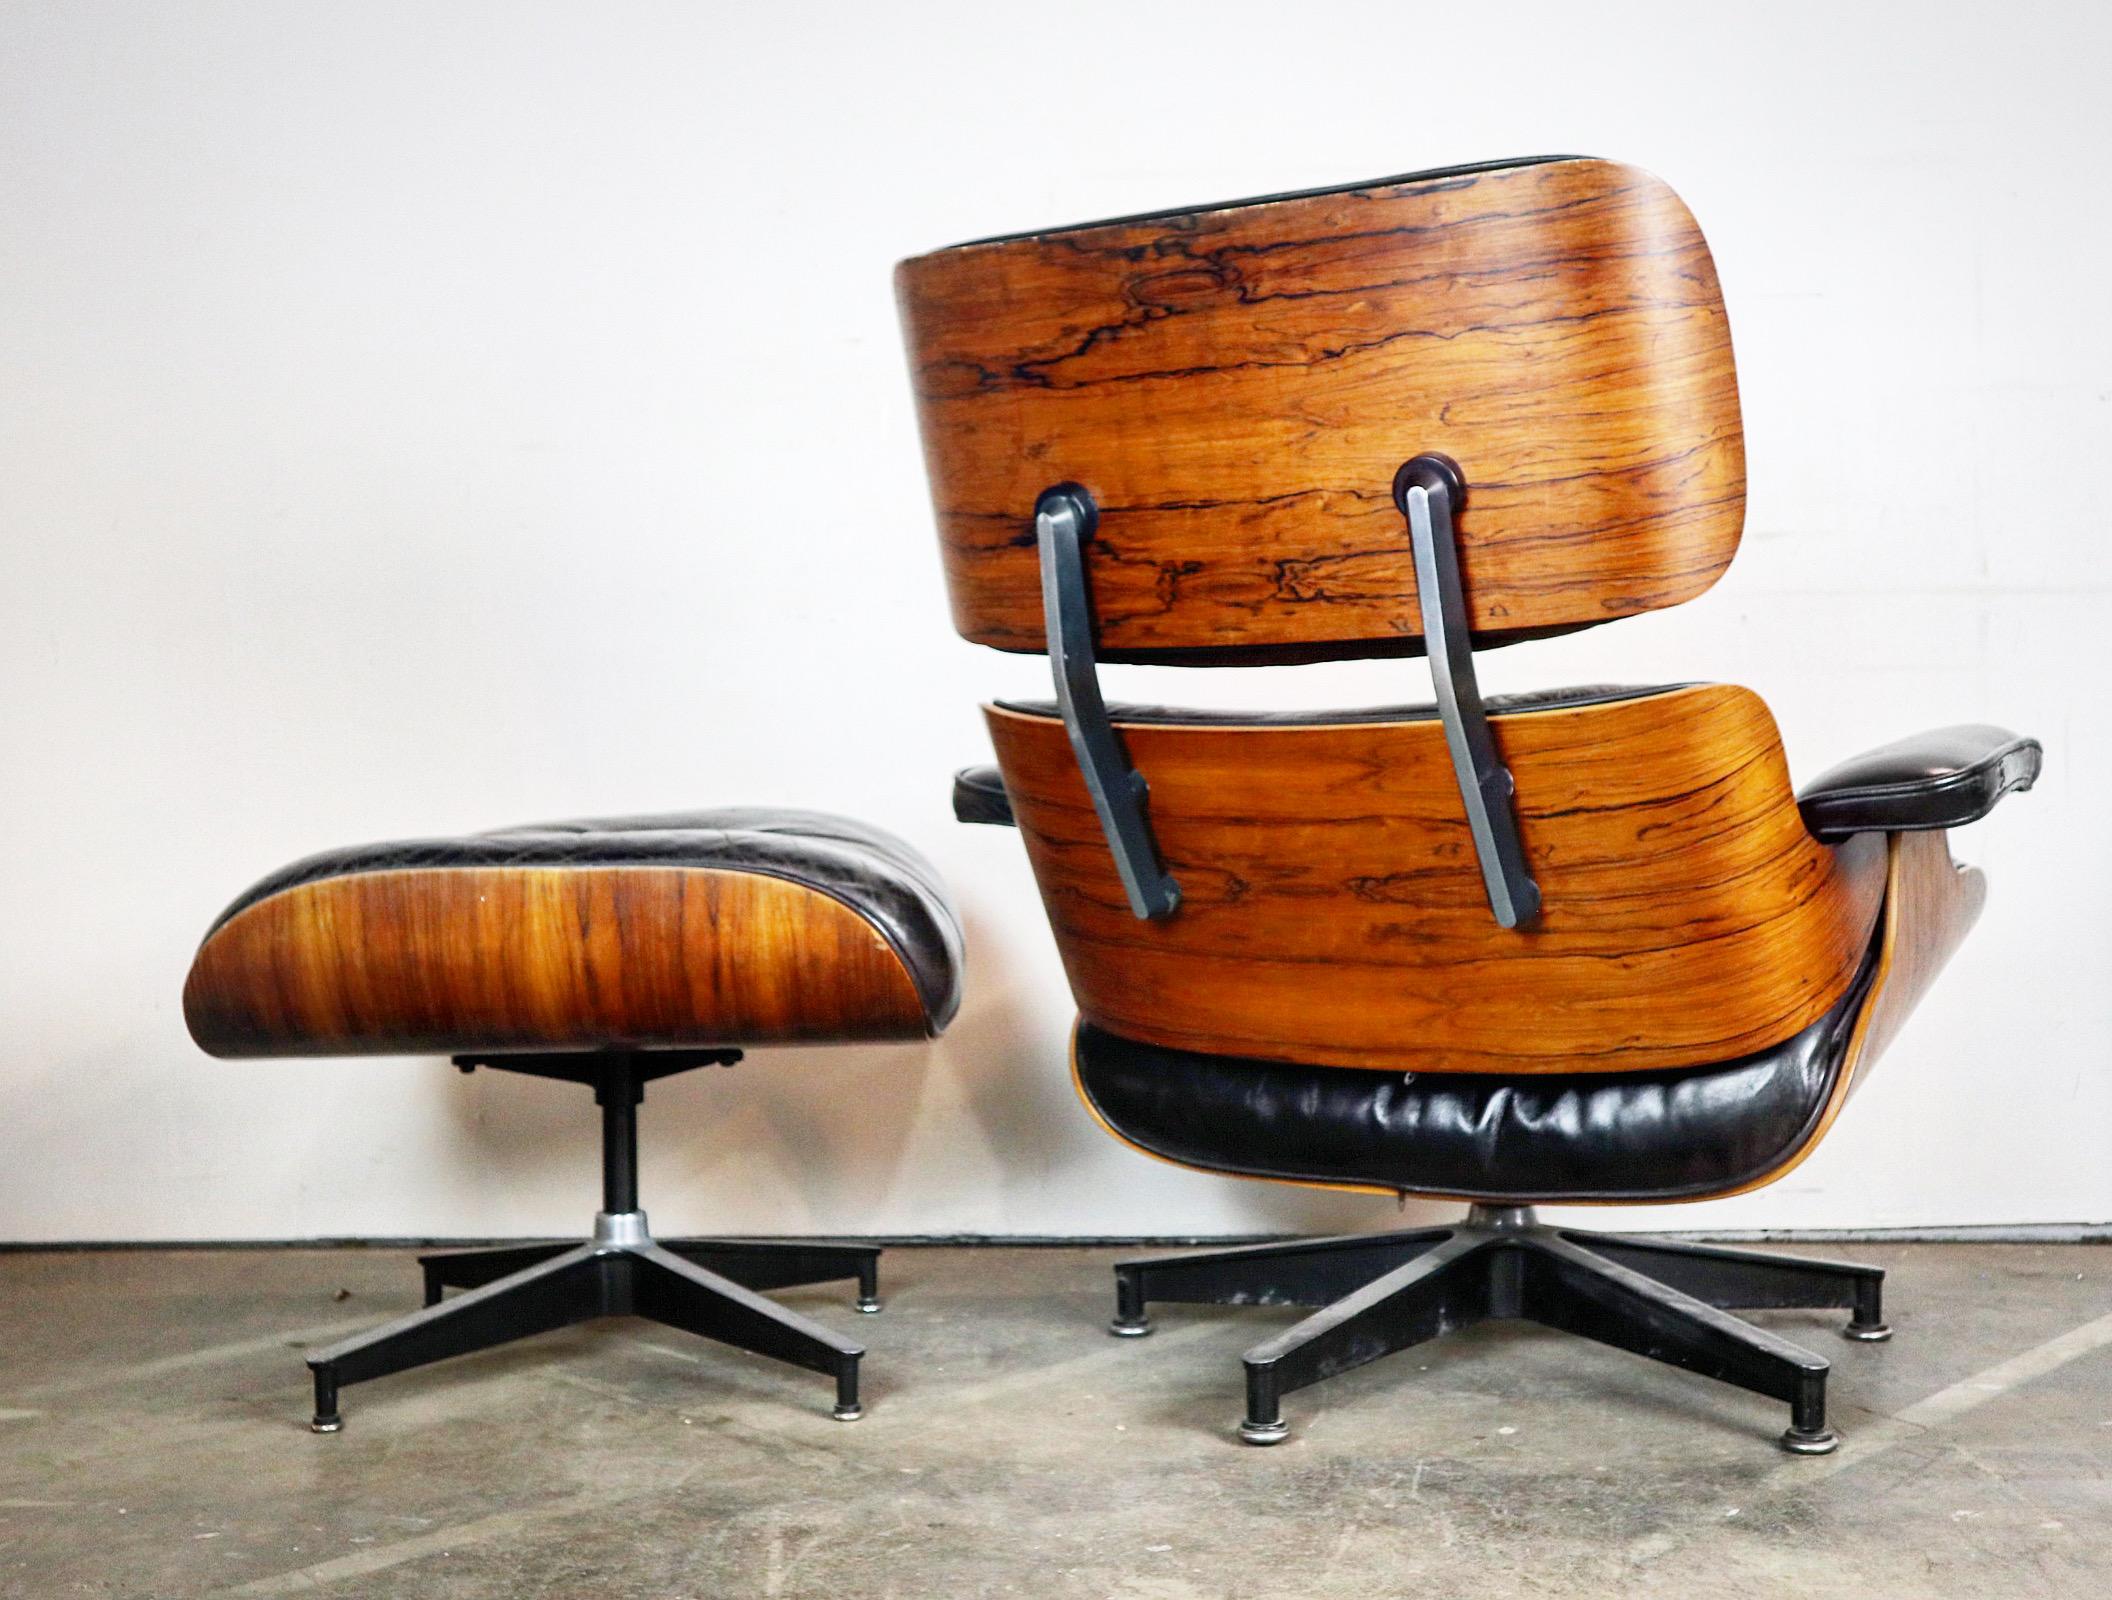 Gorgeous Herman Miller Eames lounge chair and ottoman. Spectacular color and wood grain pattern. Replaced shock mounts ($600 value) and original cushions. Signed with Herman Miller rags and guaranteed authentic.